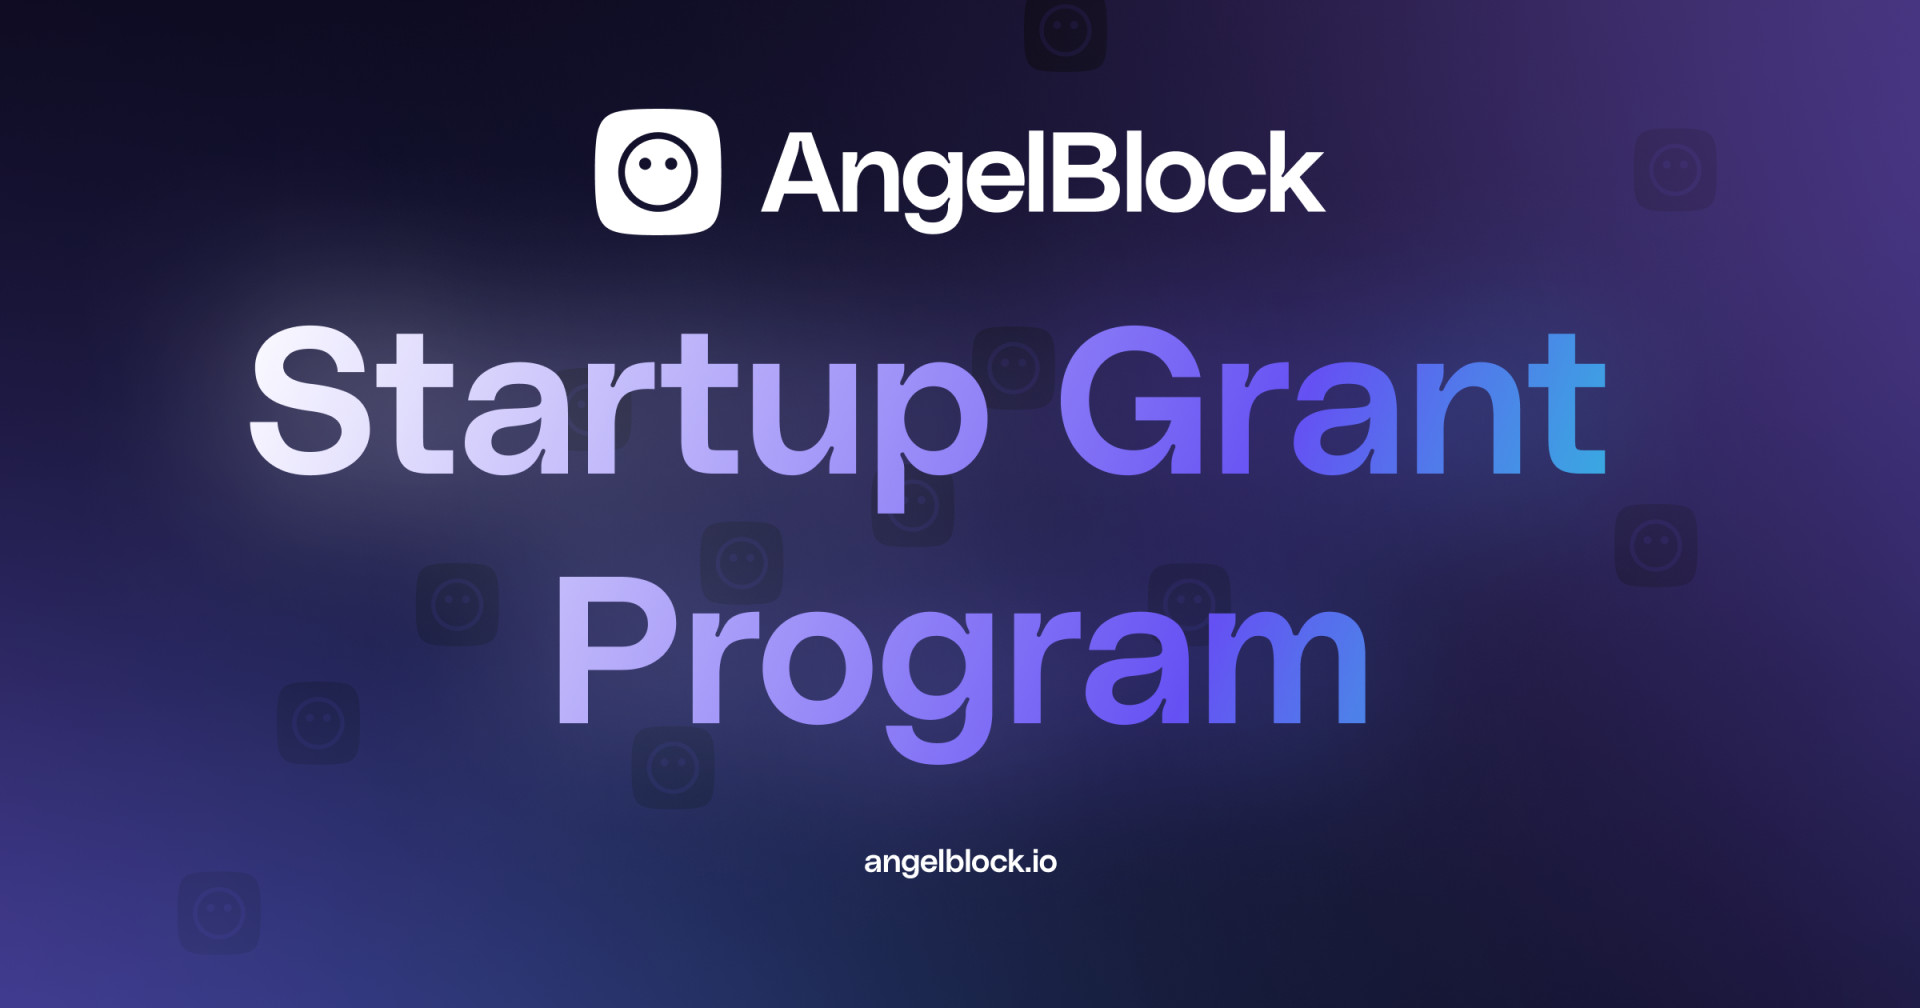 AngelBlock, DeFi protocol for crypto-native fundraising, announces its Startup Grant Program and platform launch